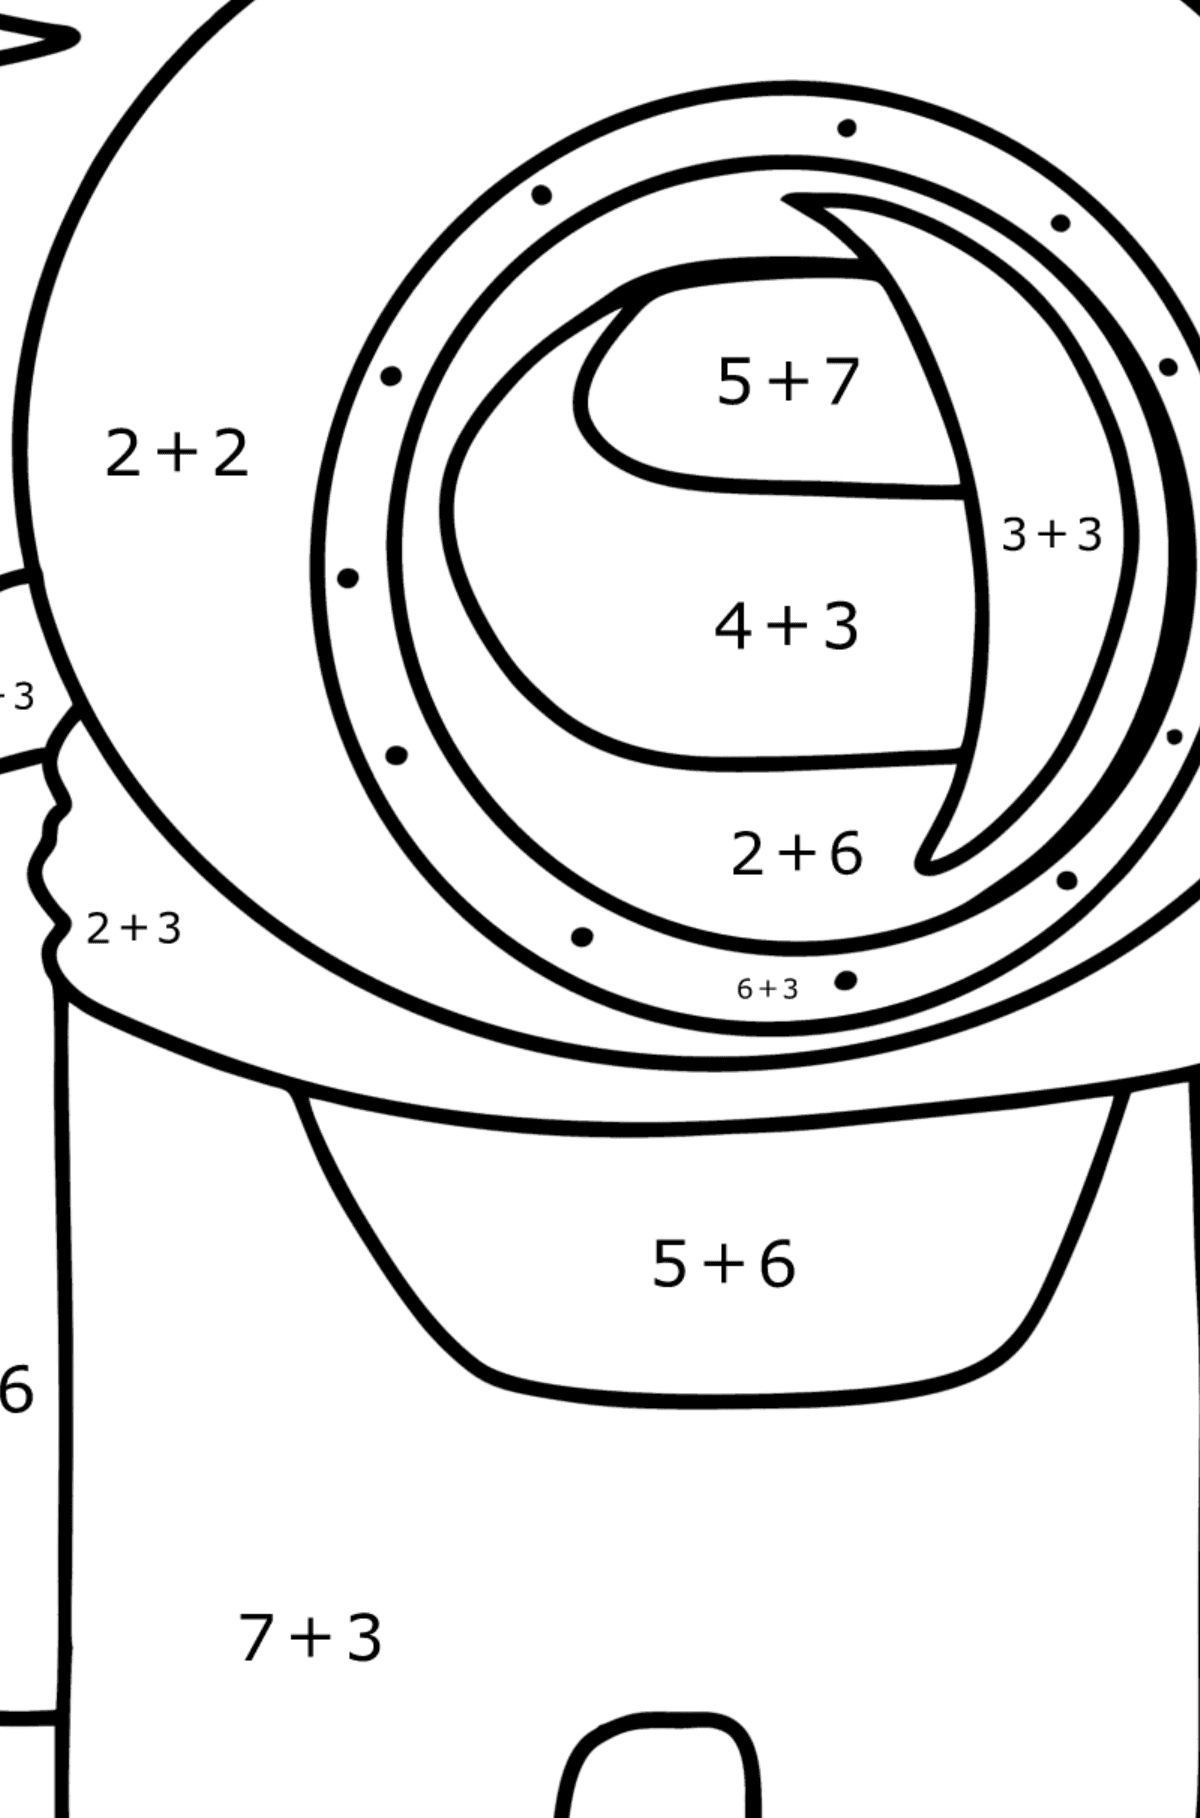 Colouring page of Among Us - Math Coloring - Addition for Kids